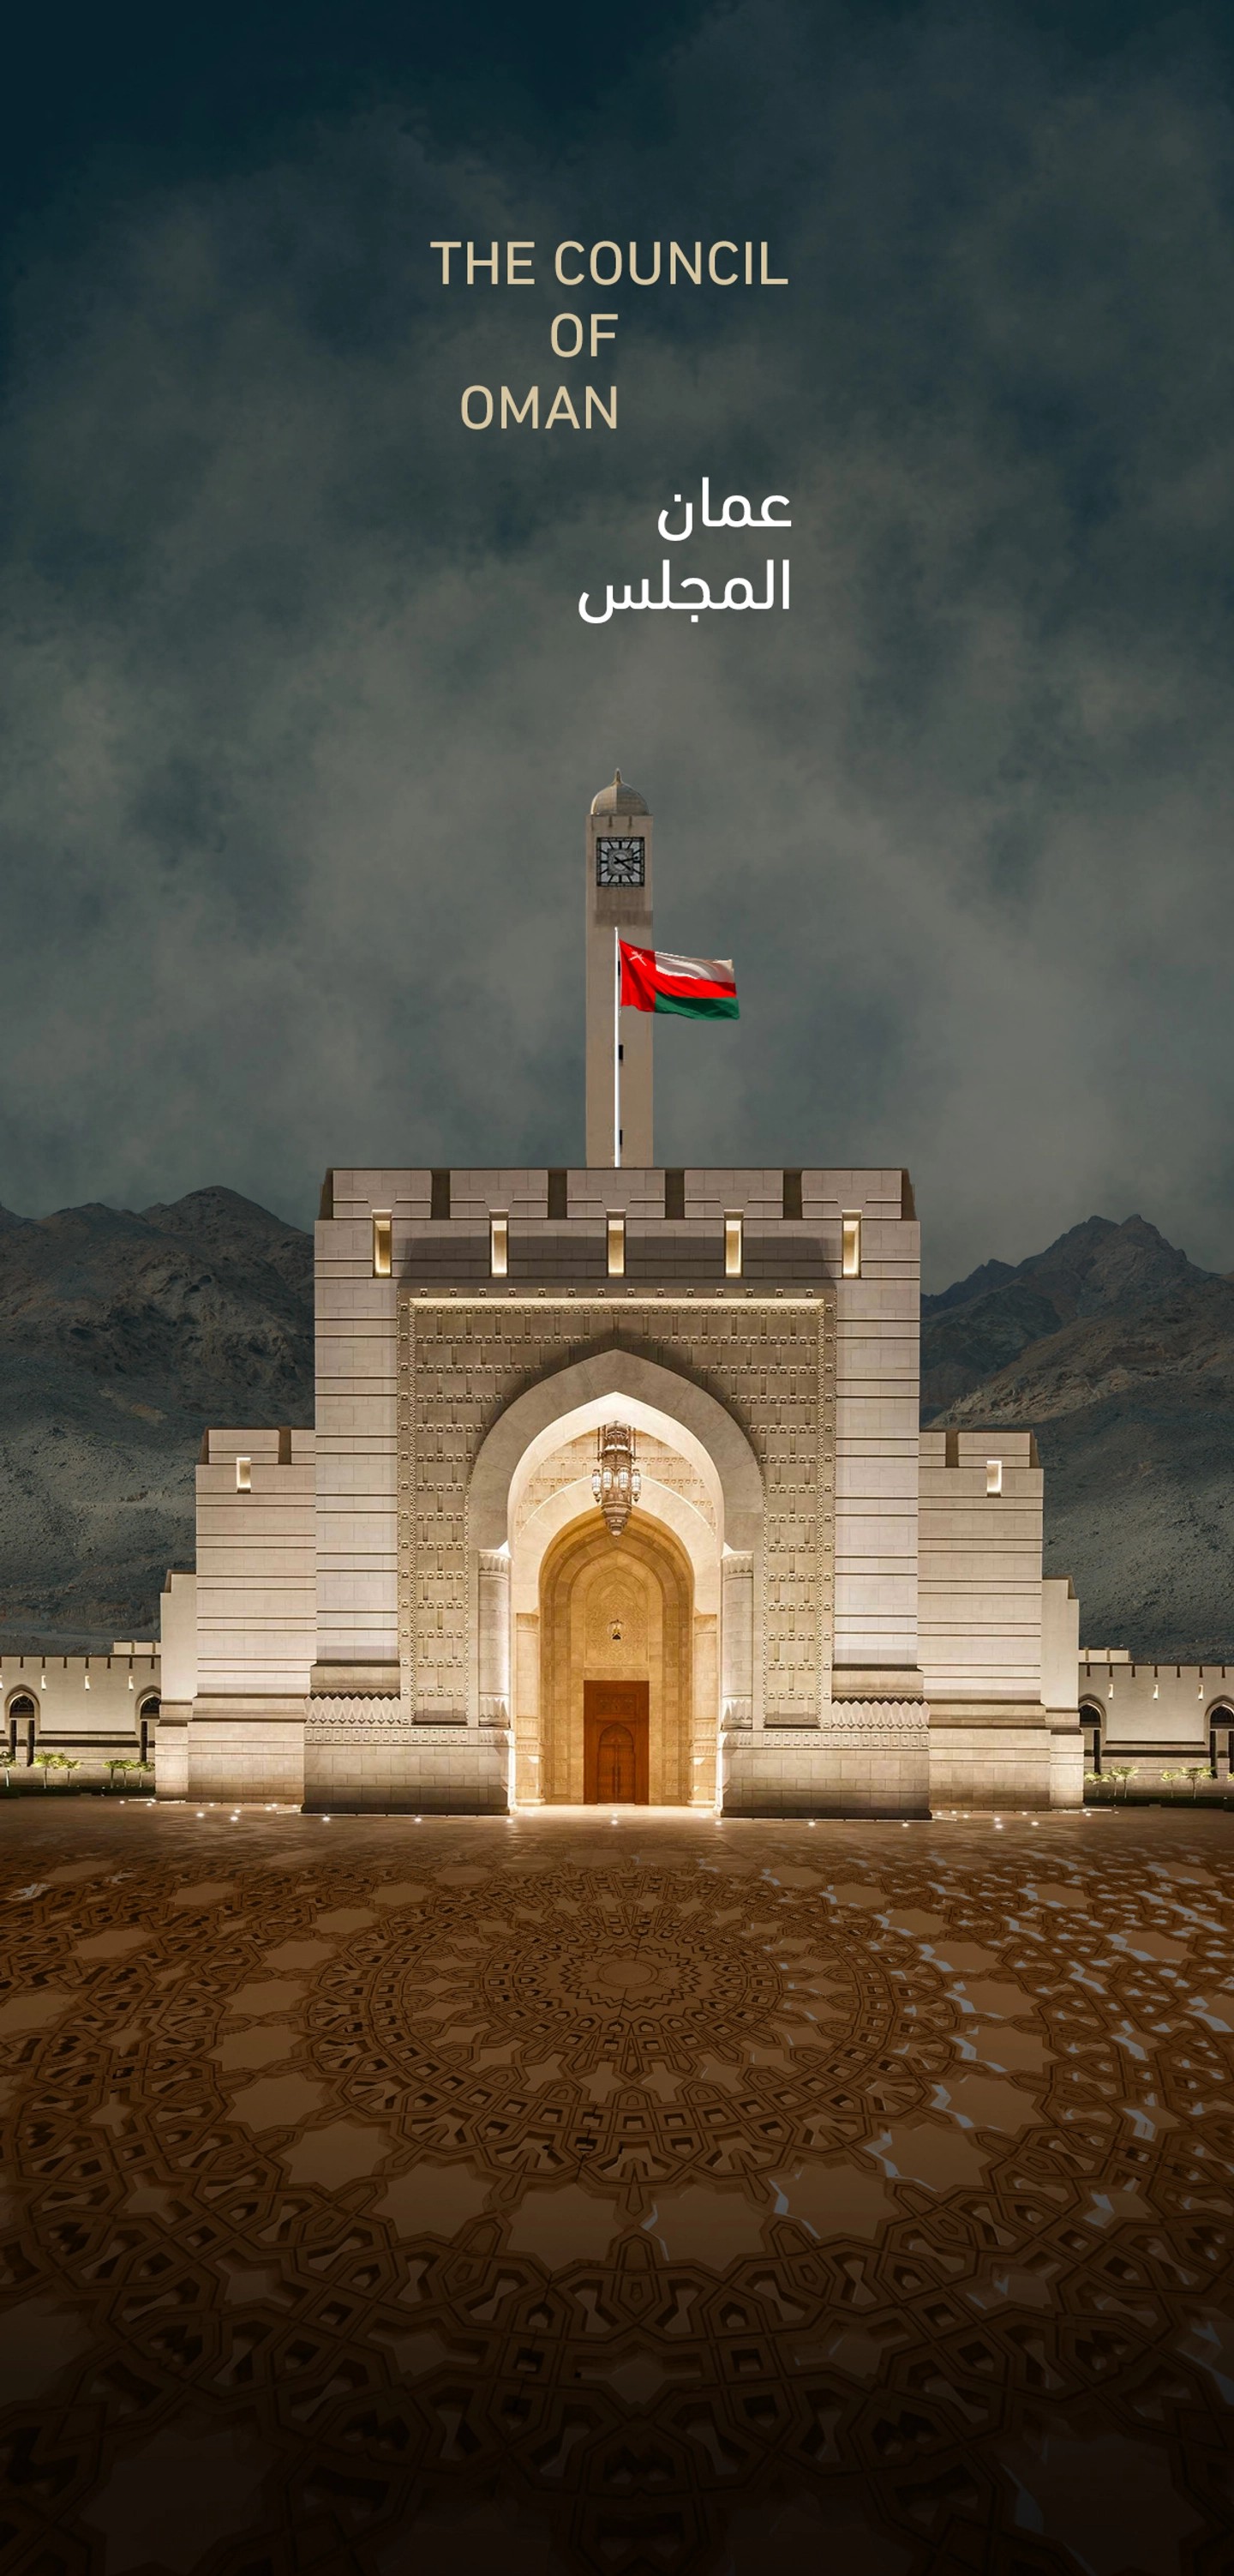 Political institutions in Oman